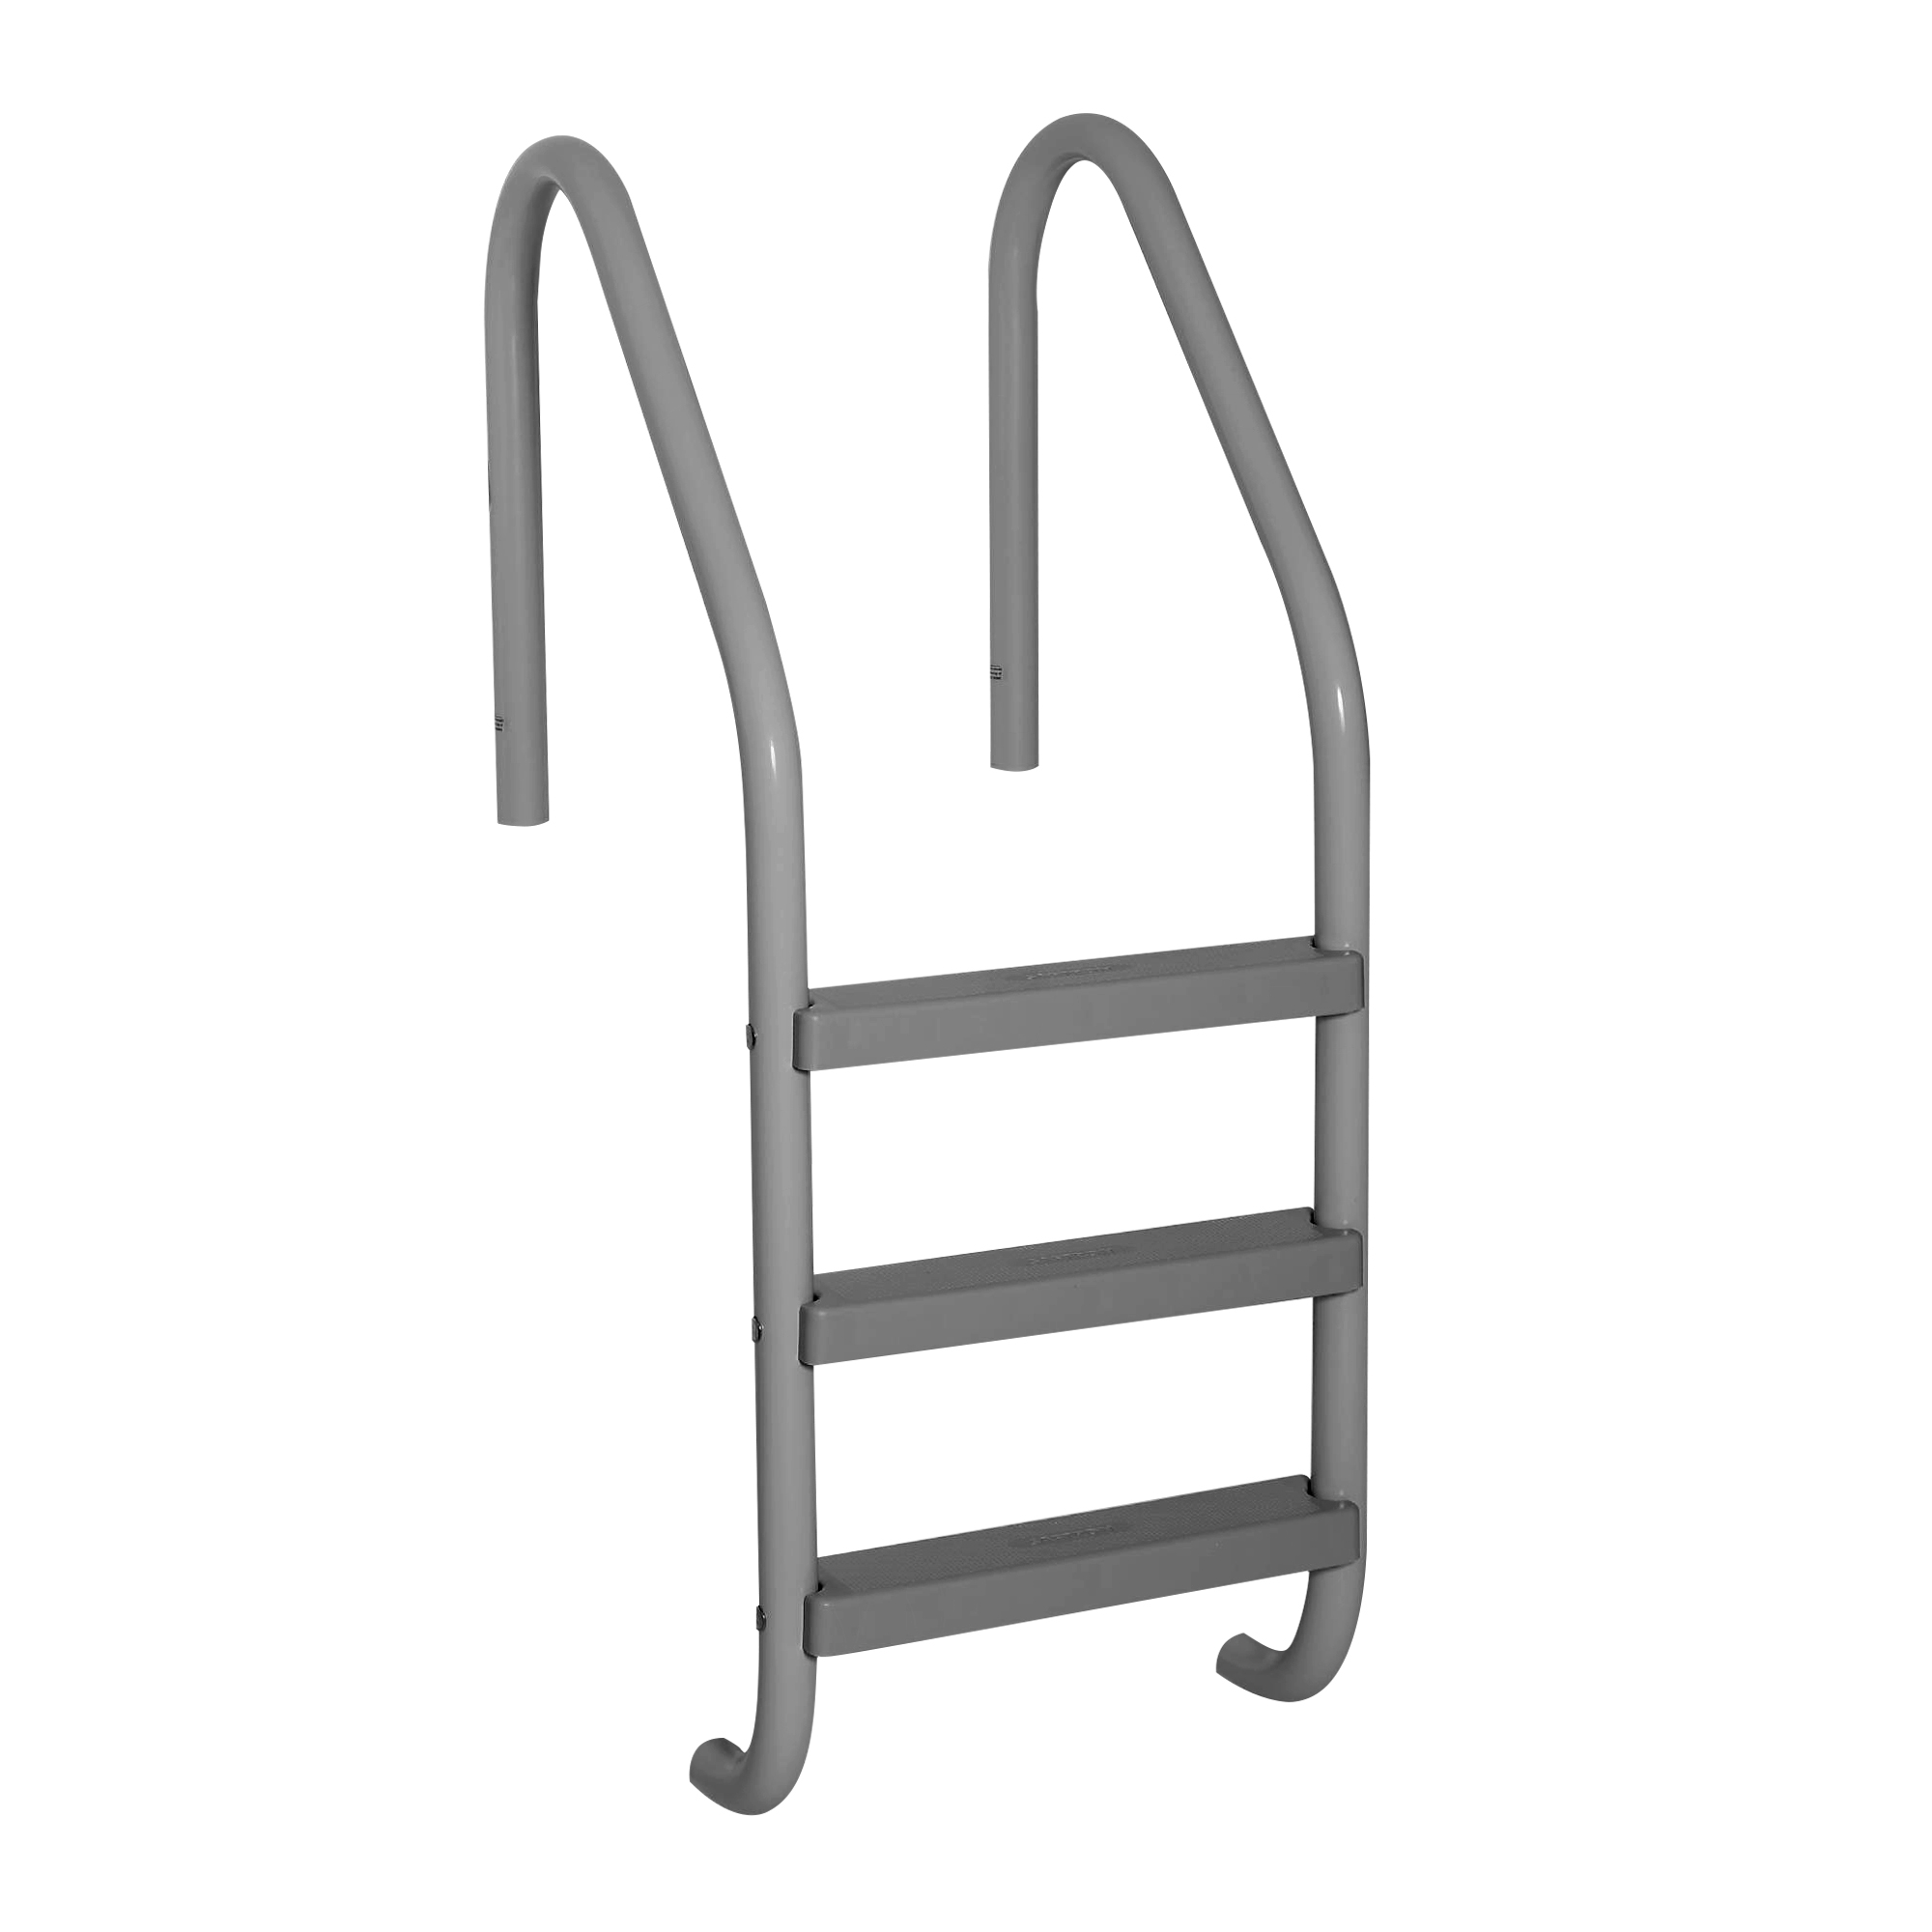 3 Step High Impact Polymer In-Ground Pool Ladder - Graphite Gray